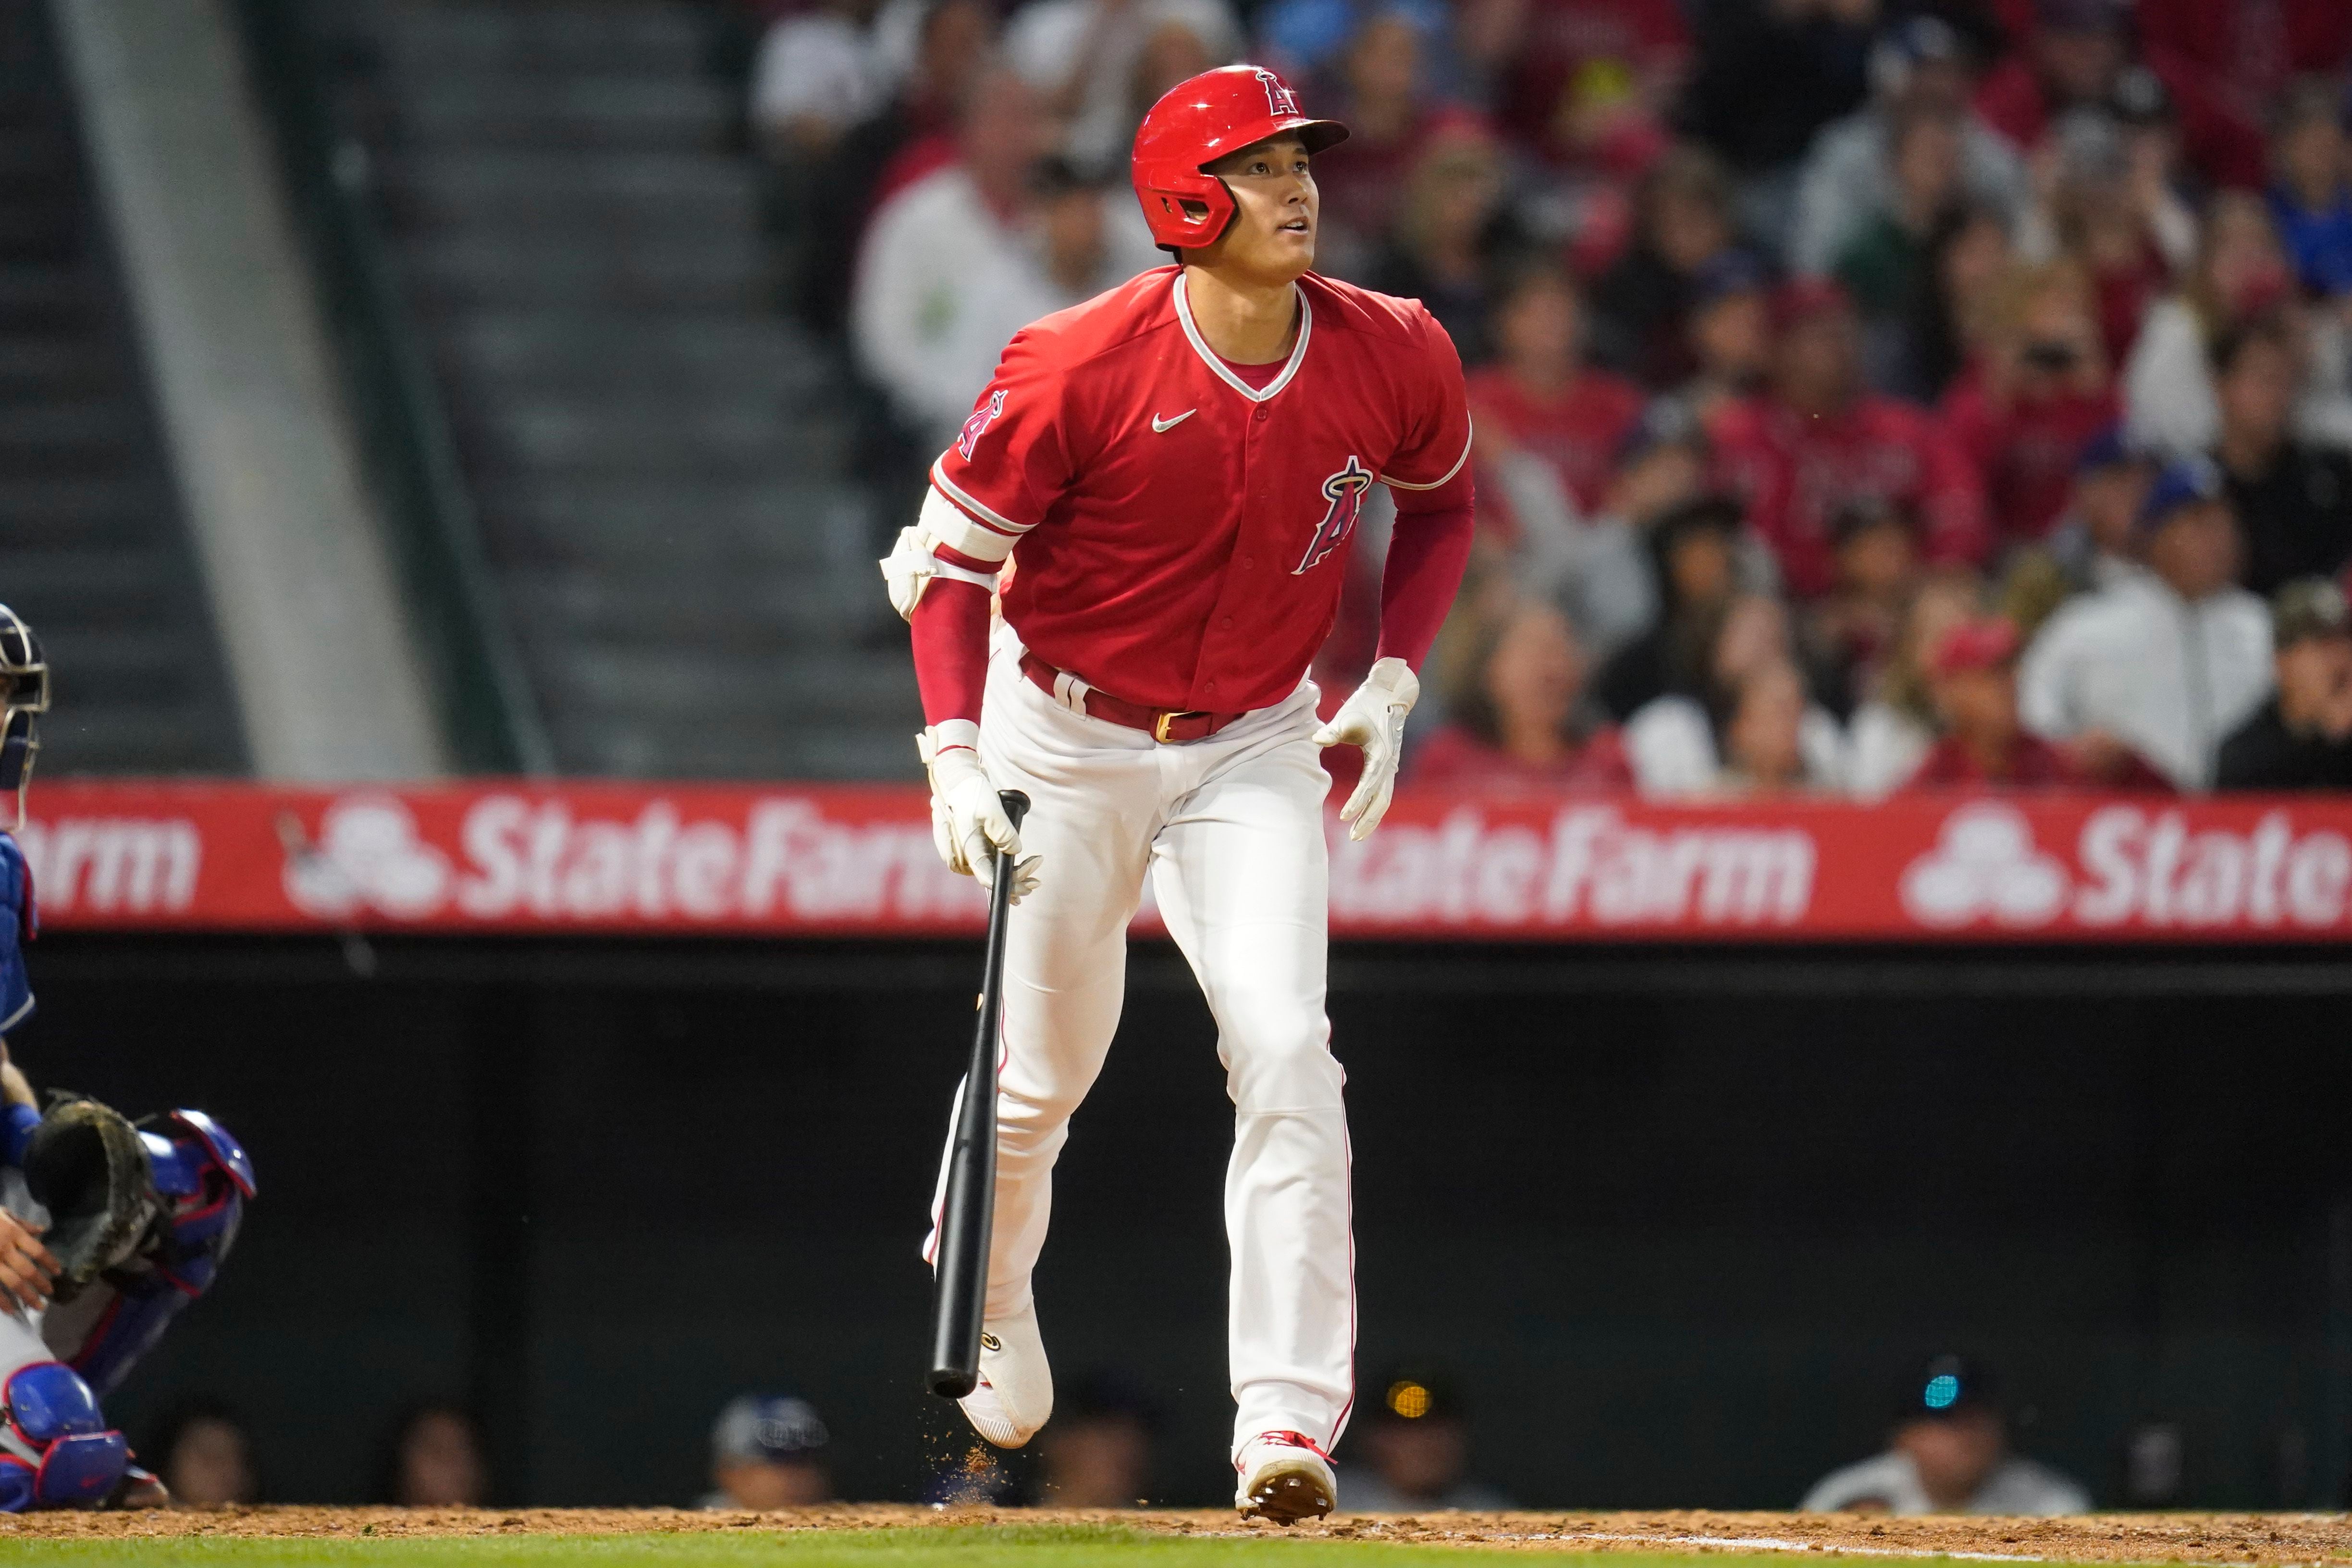 Chicago Cubs: Mike Trout on Seiya Suzuki's viral moment